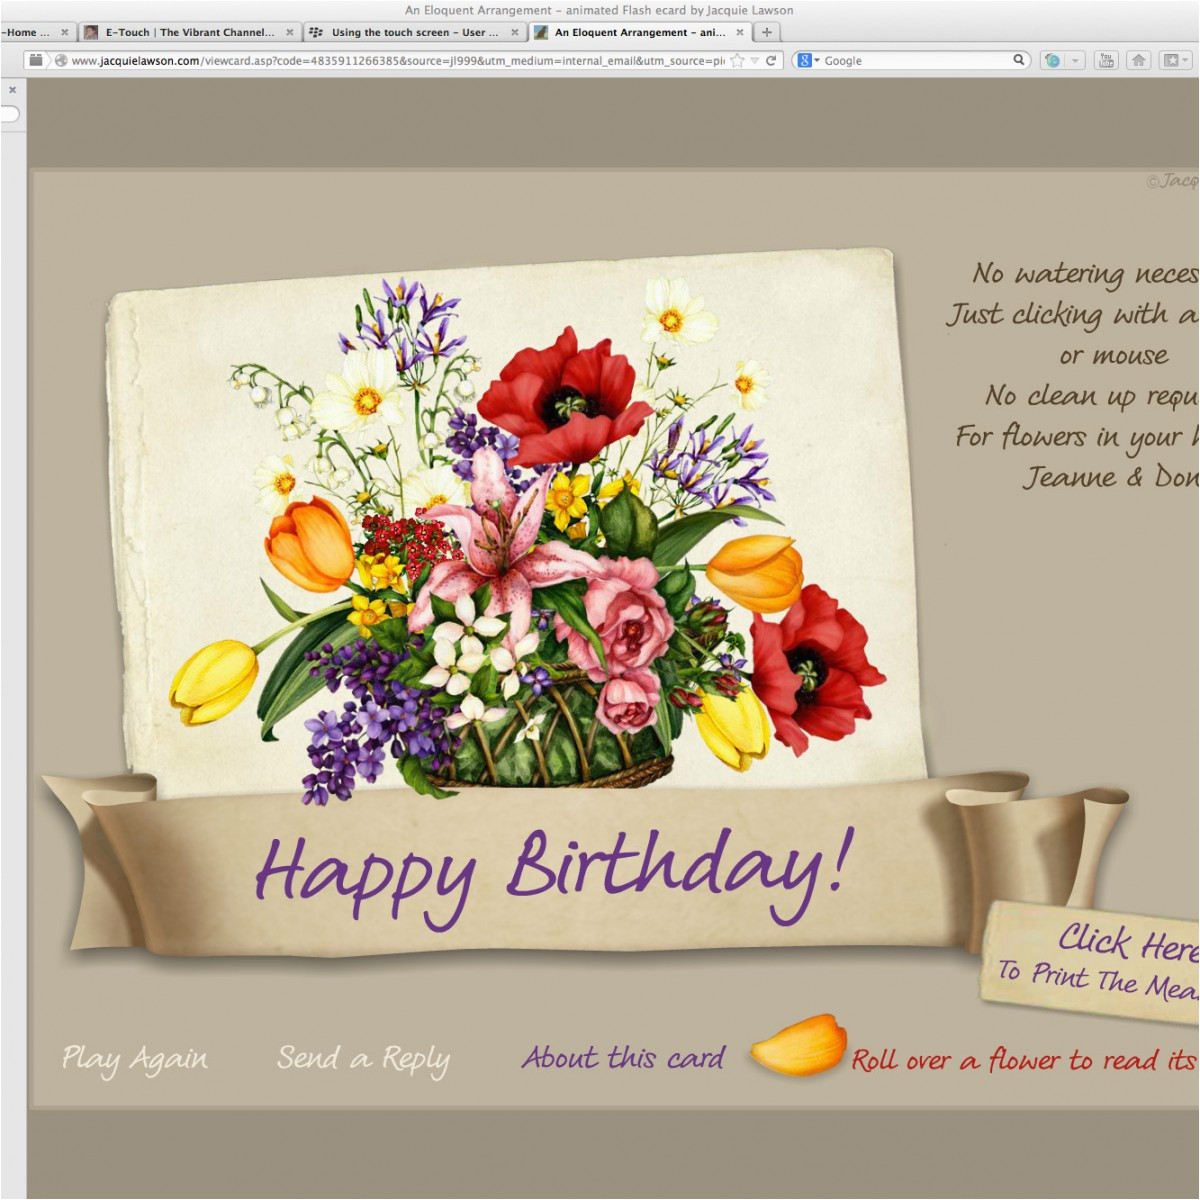 22-best-jacquie-lawson-birthday-cards-login-home-family-style-and